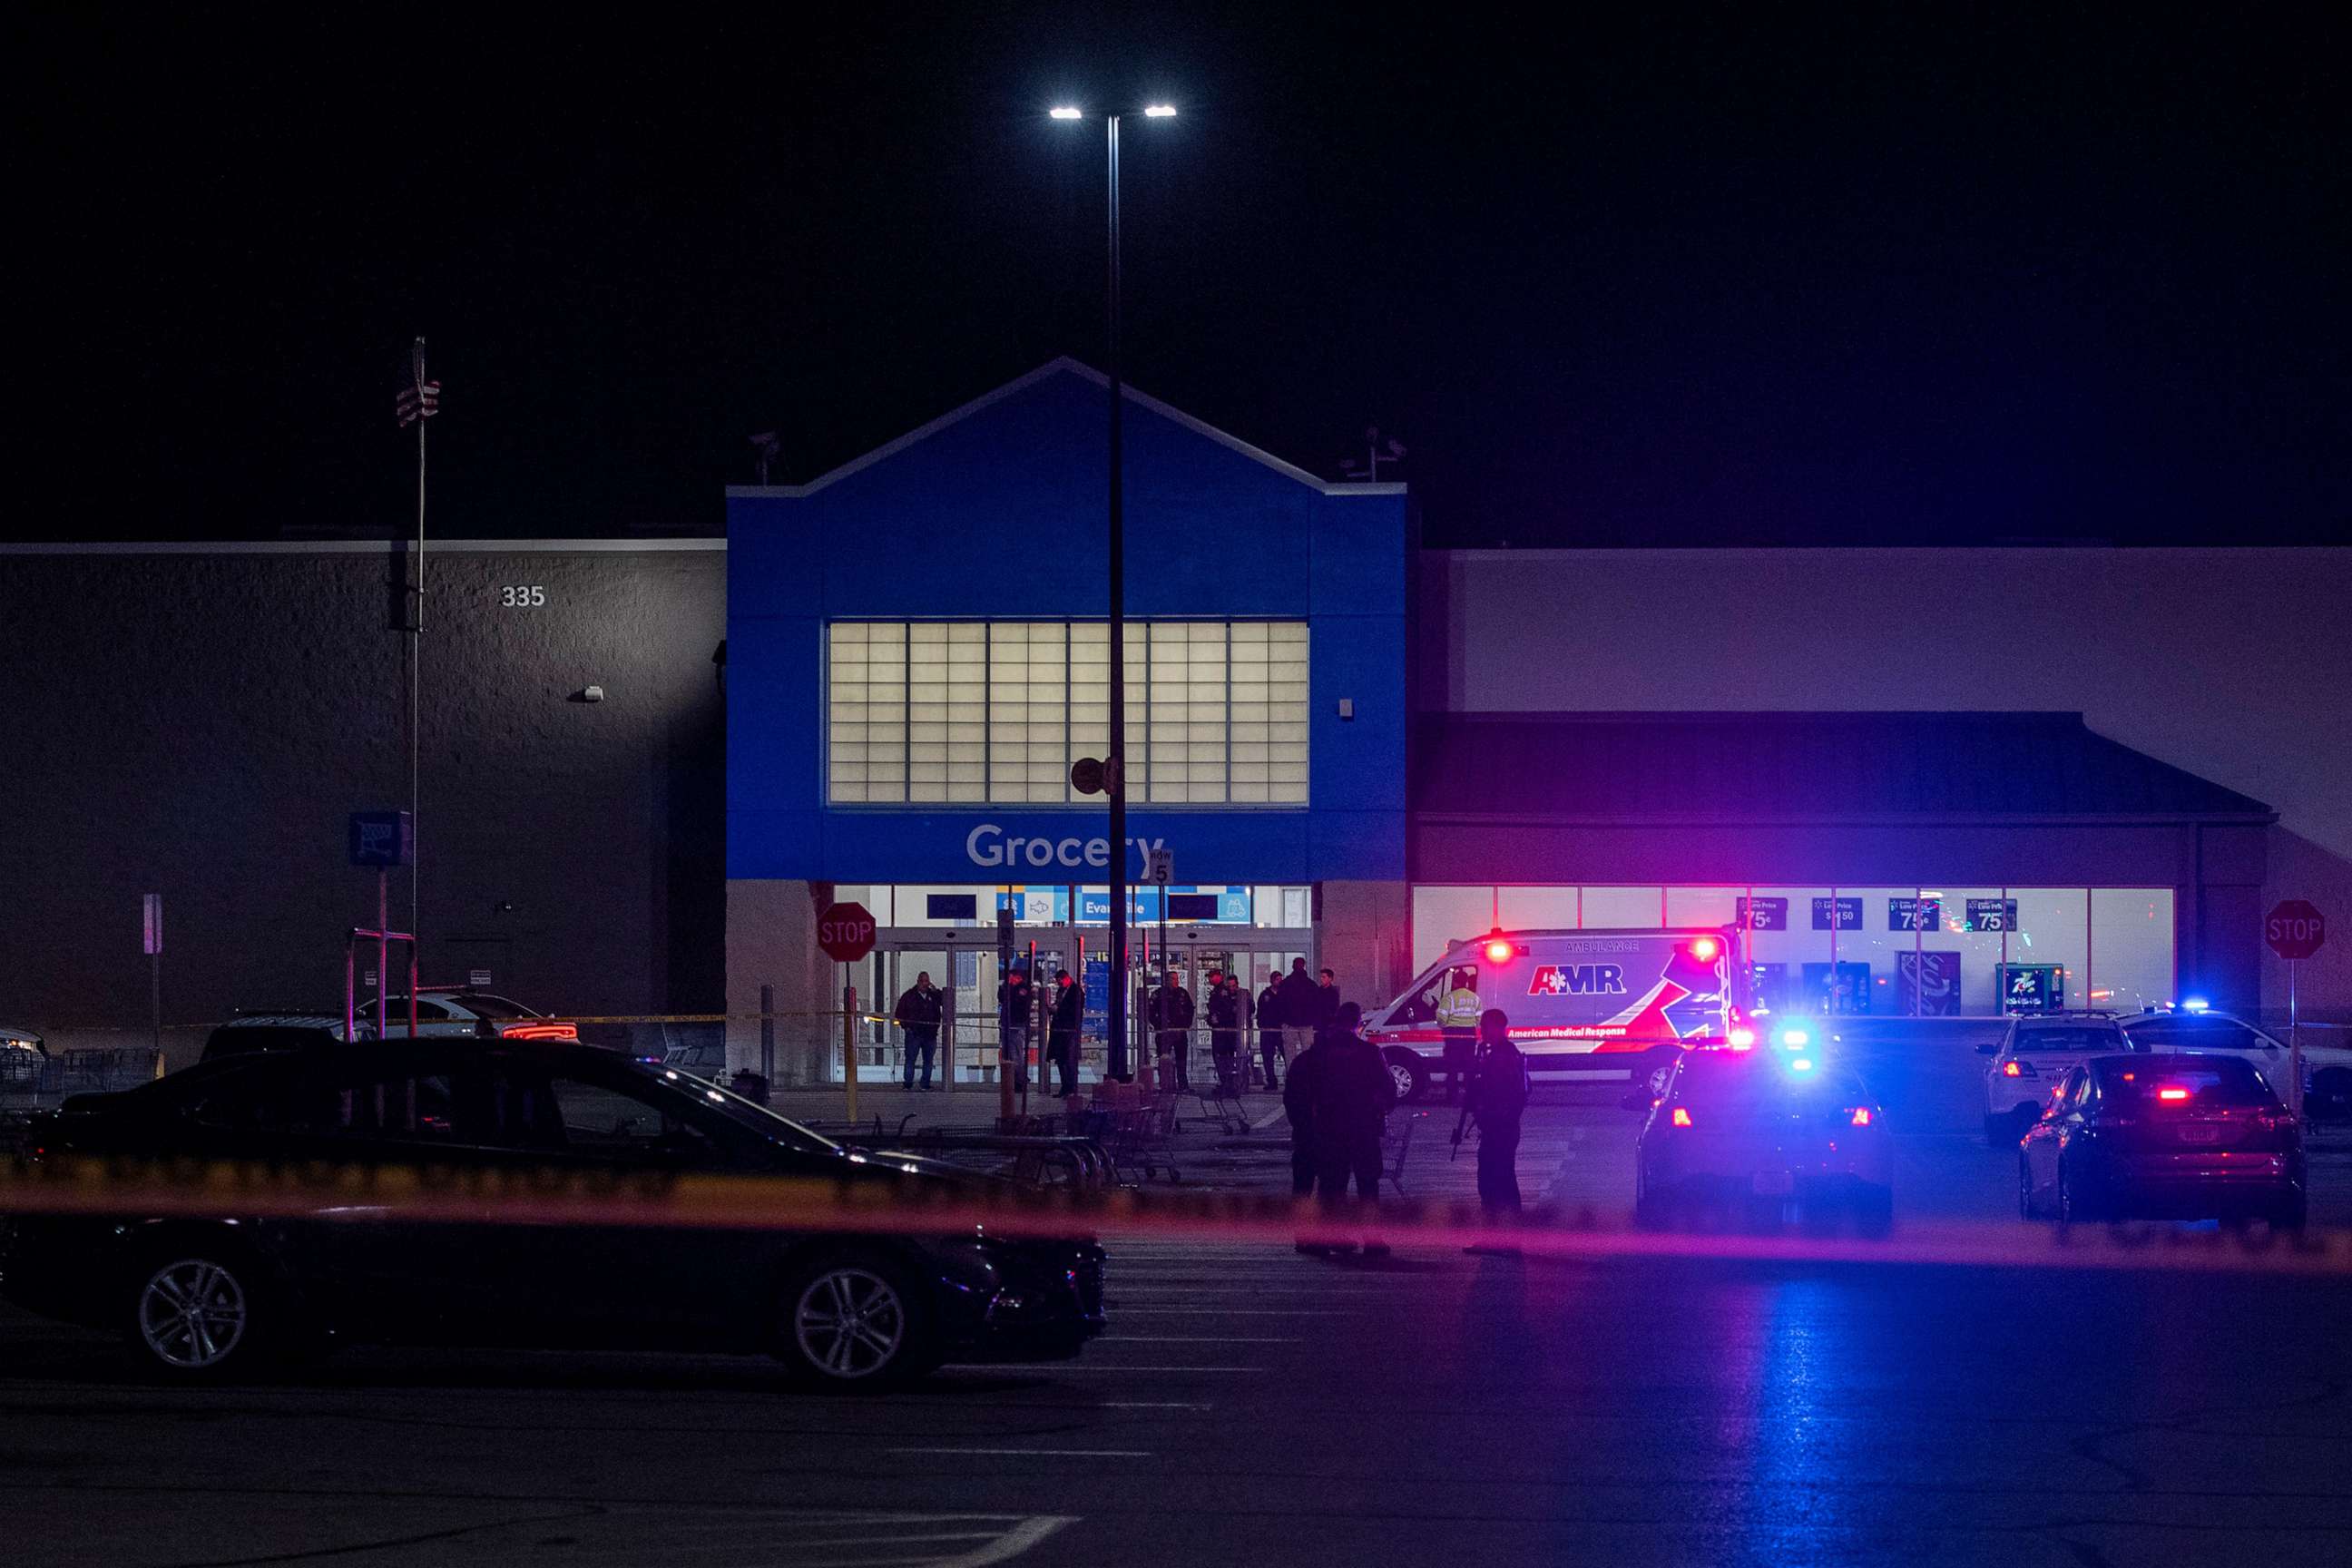 PHOTO: Emergency responders work the scene of a shooting at the West Side Walmart located at 335 S. Red Bank Road in Evansville, Ind., Jan. 20, 2023.